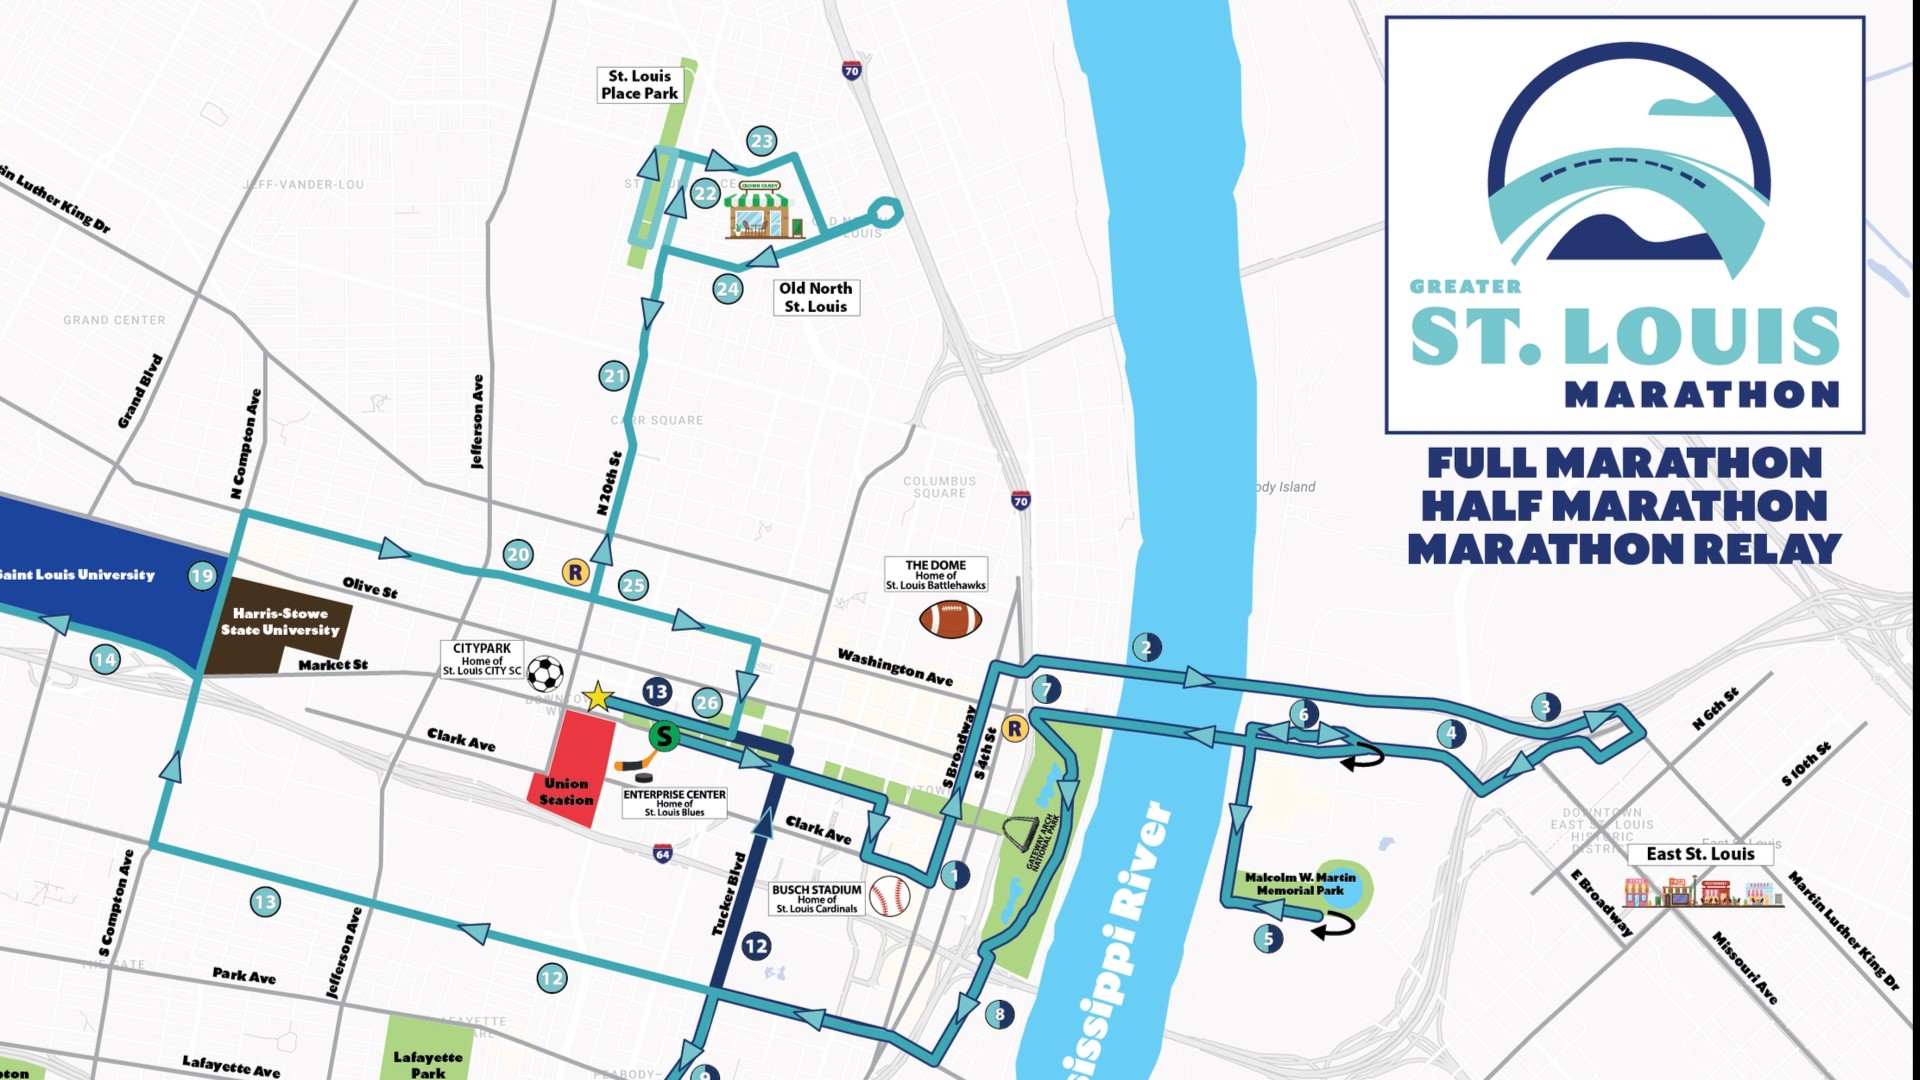 The Greater St. Louis Marathon has changed locations this year. For the first time ever, there will also be an after-party.